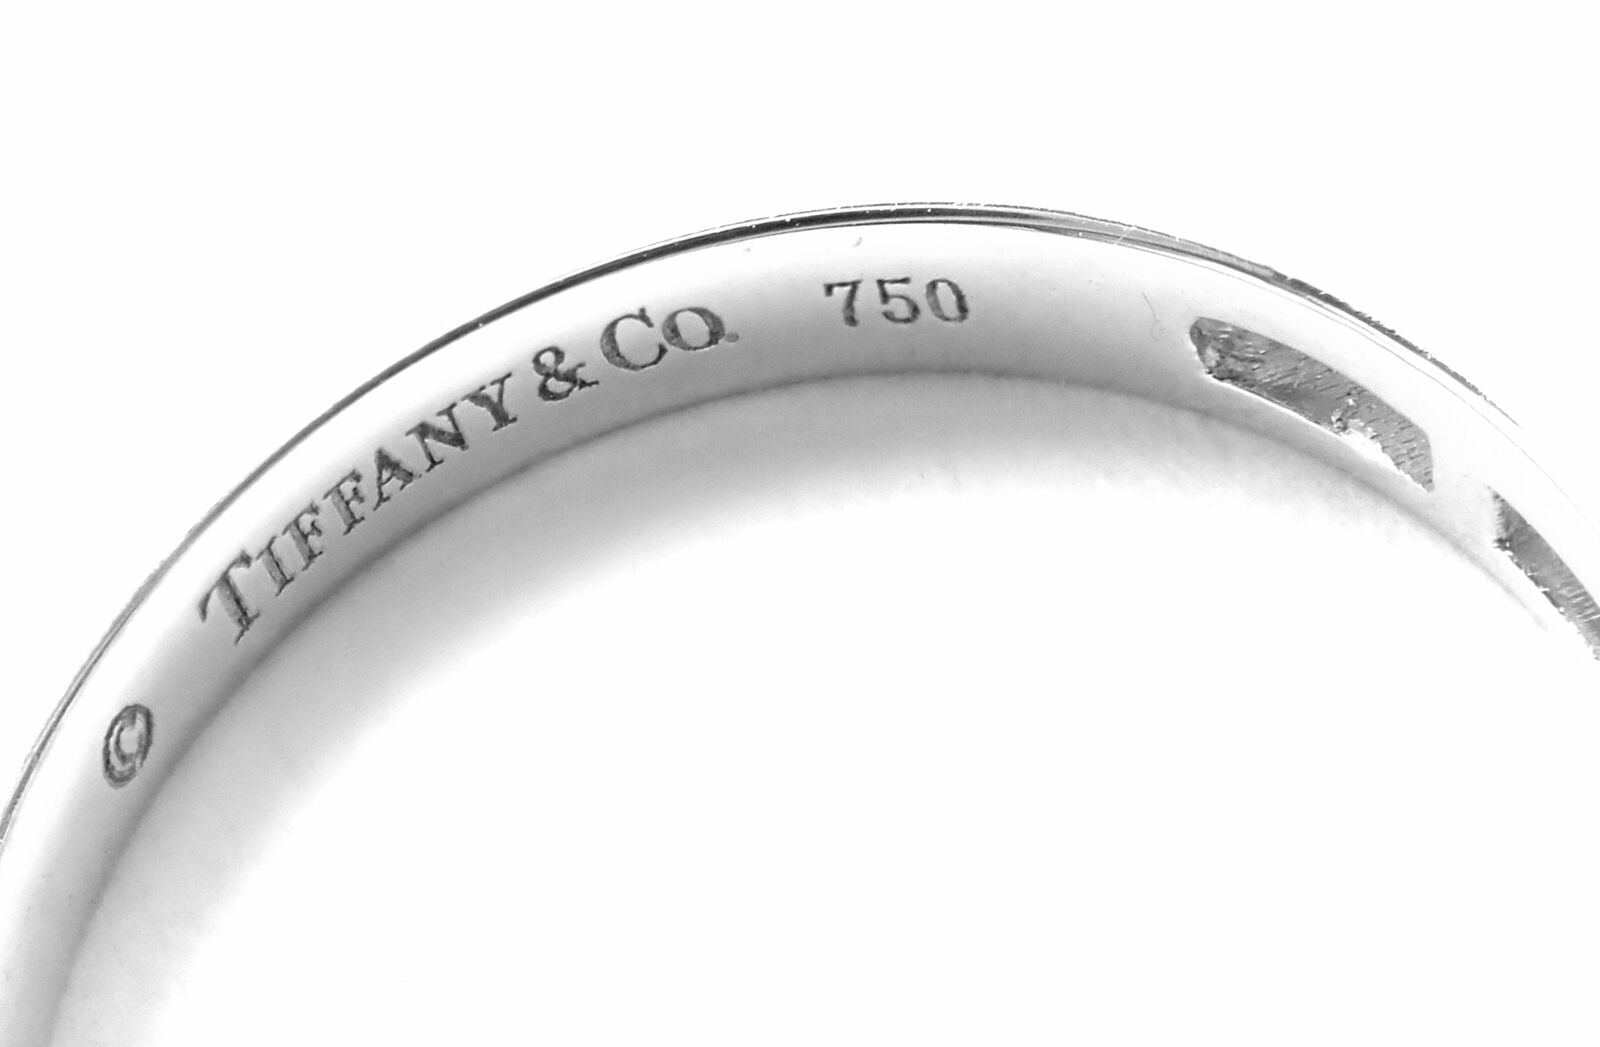 Tiffany & Co. Jewelry & Watches:Fine Jewelry:Rings Authentic! Tiffany & Co 18k White Gold Diamond Channel Set Band Ring